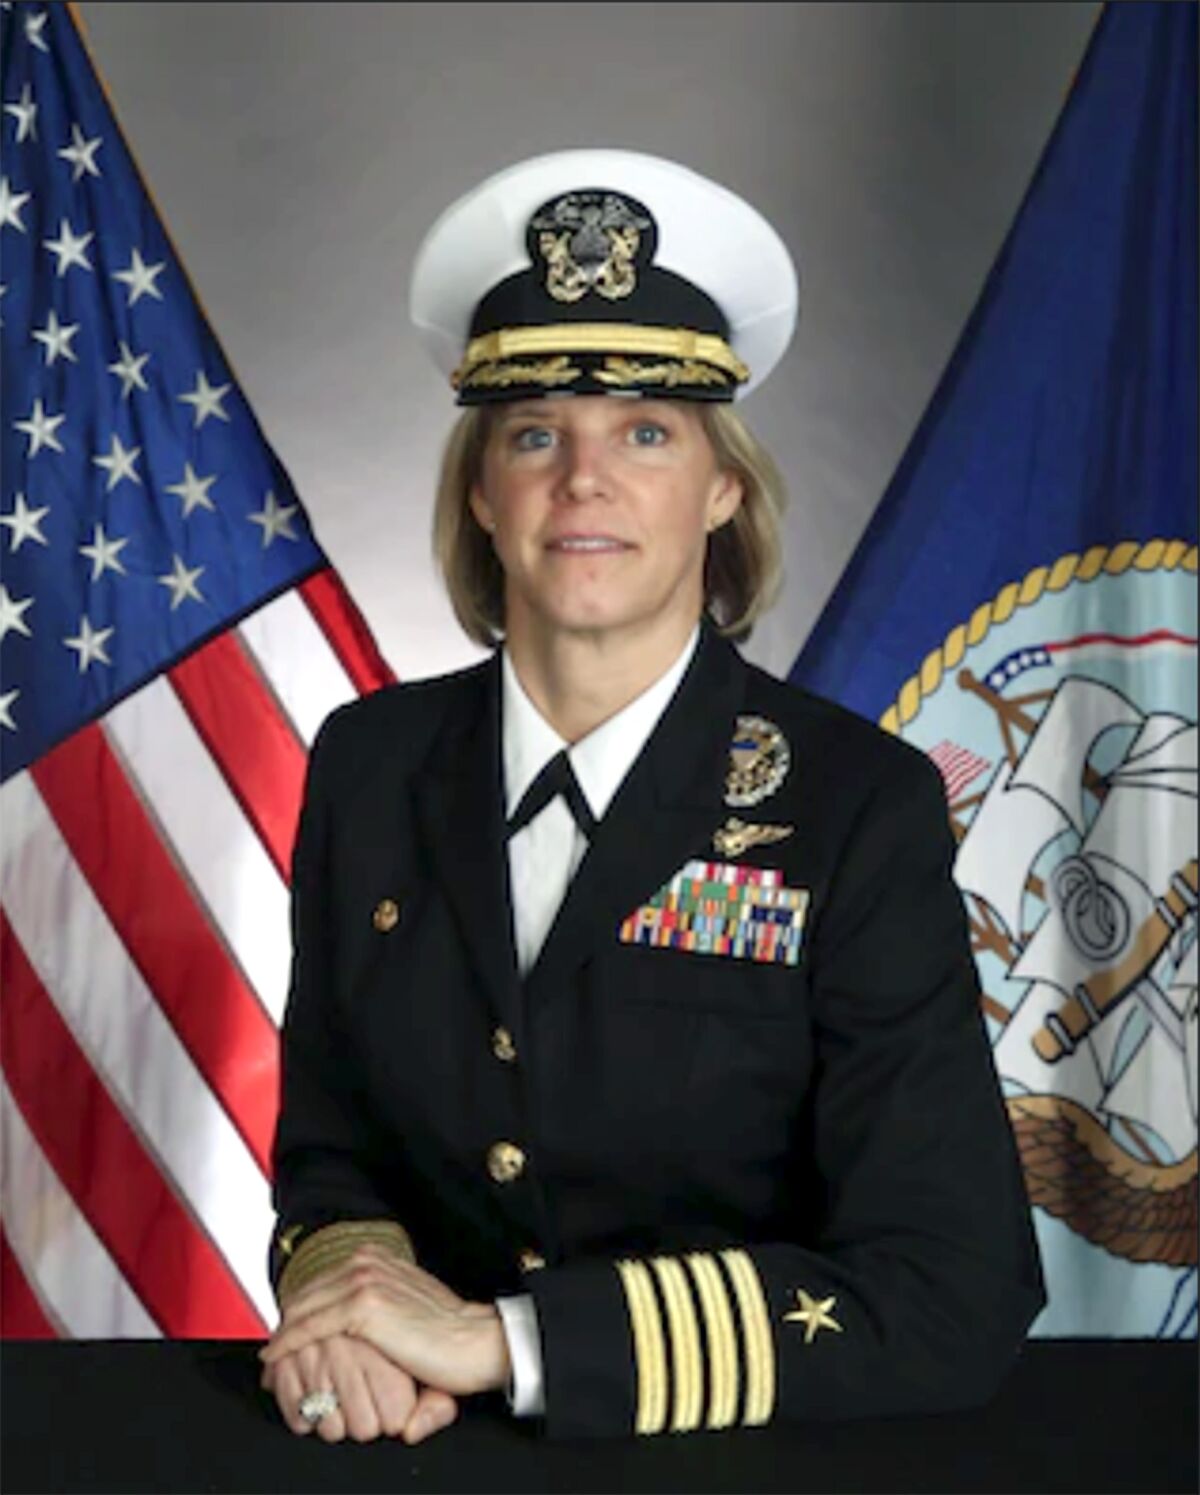 Capt. Amy Bauernschmidt will take command of the USS Abraham Lincoln in the summer.